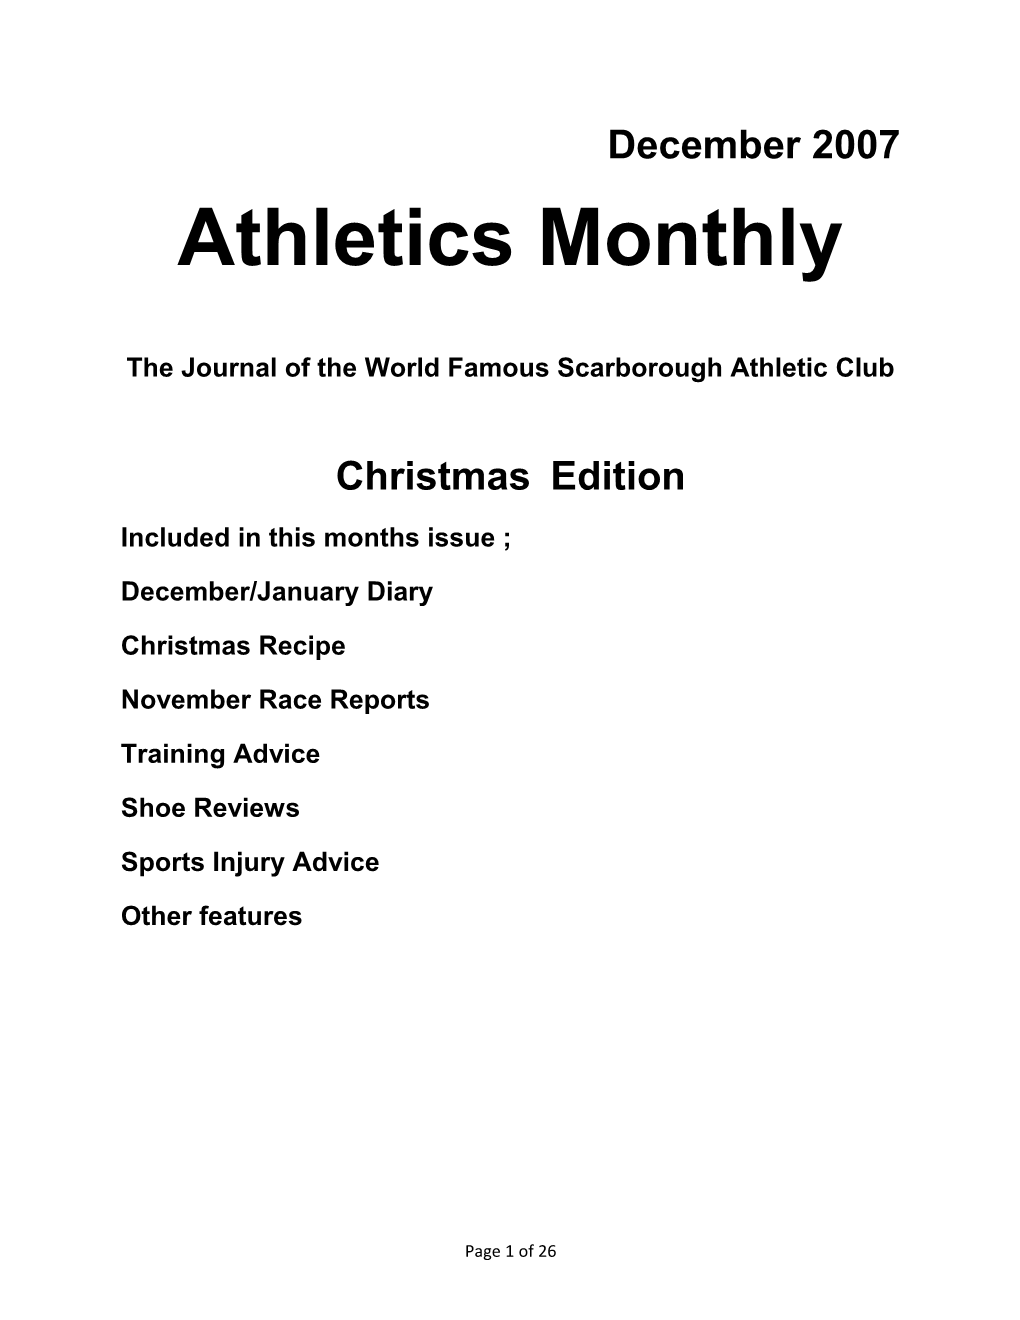 The Journal of the World Famous Scarborough Athletic Club